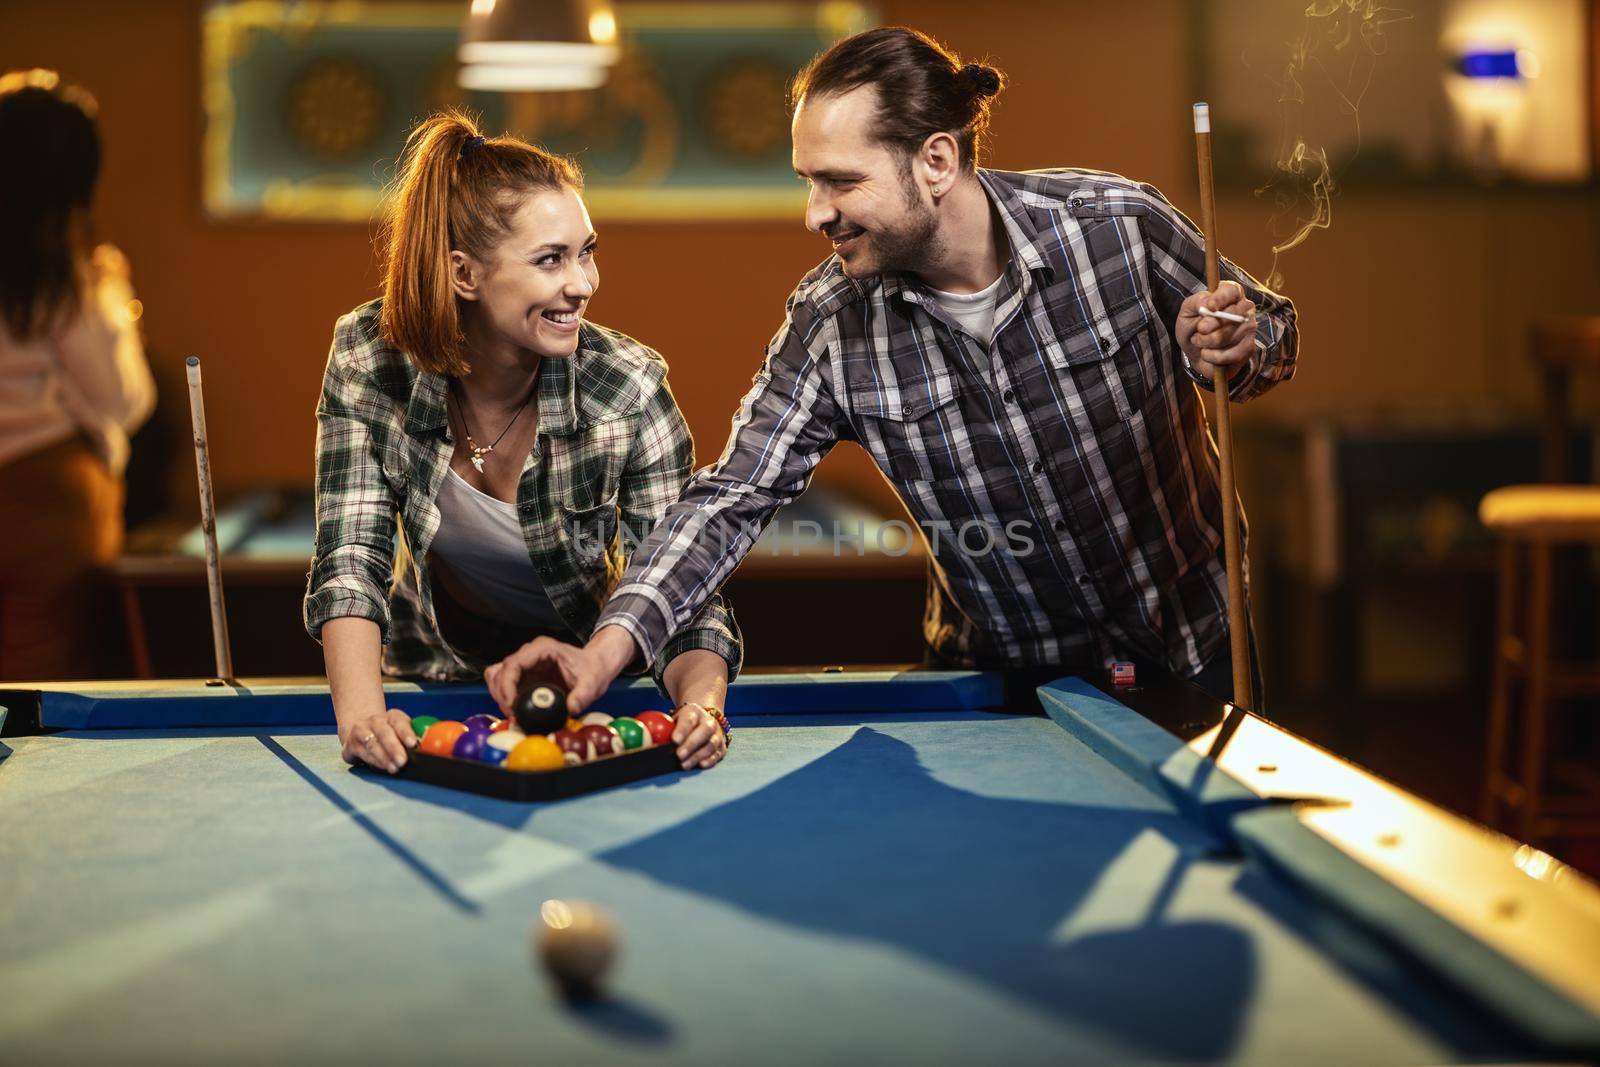 Young smiling cheerful couple is playing billiards in bar after work. They are having fun and involved in recreational activity.